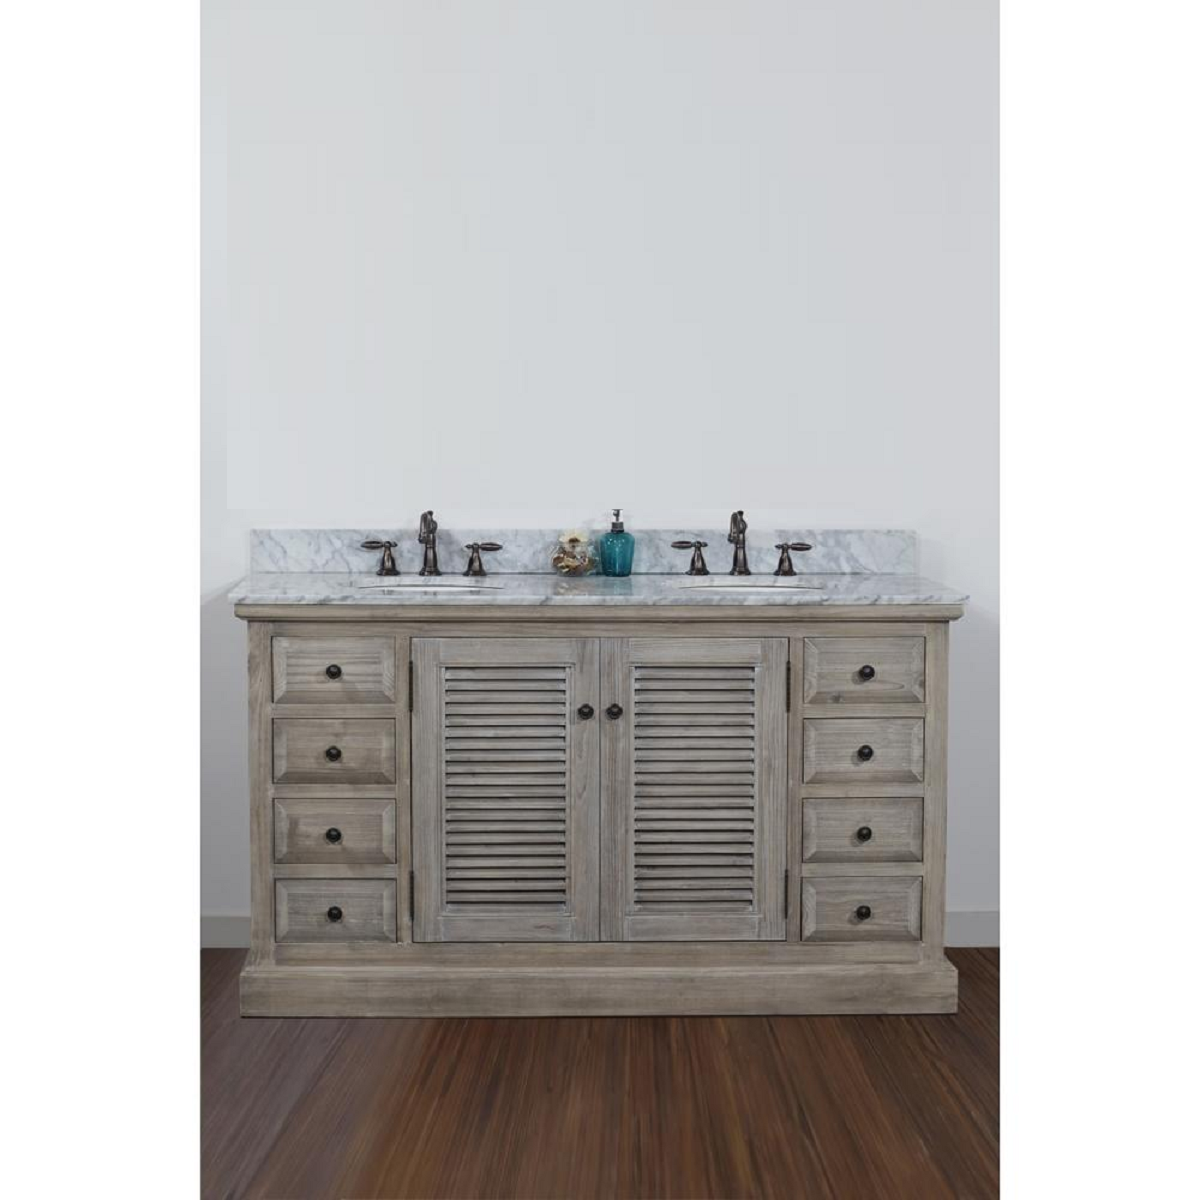 INFURNITURE WK1960+CW TOP 60 INCH SOLID RECYCLED FIR DOUBLE SINK VANITY WITH CARRARA WHITE MARBLE TOP